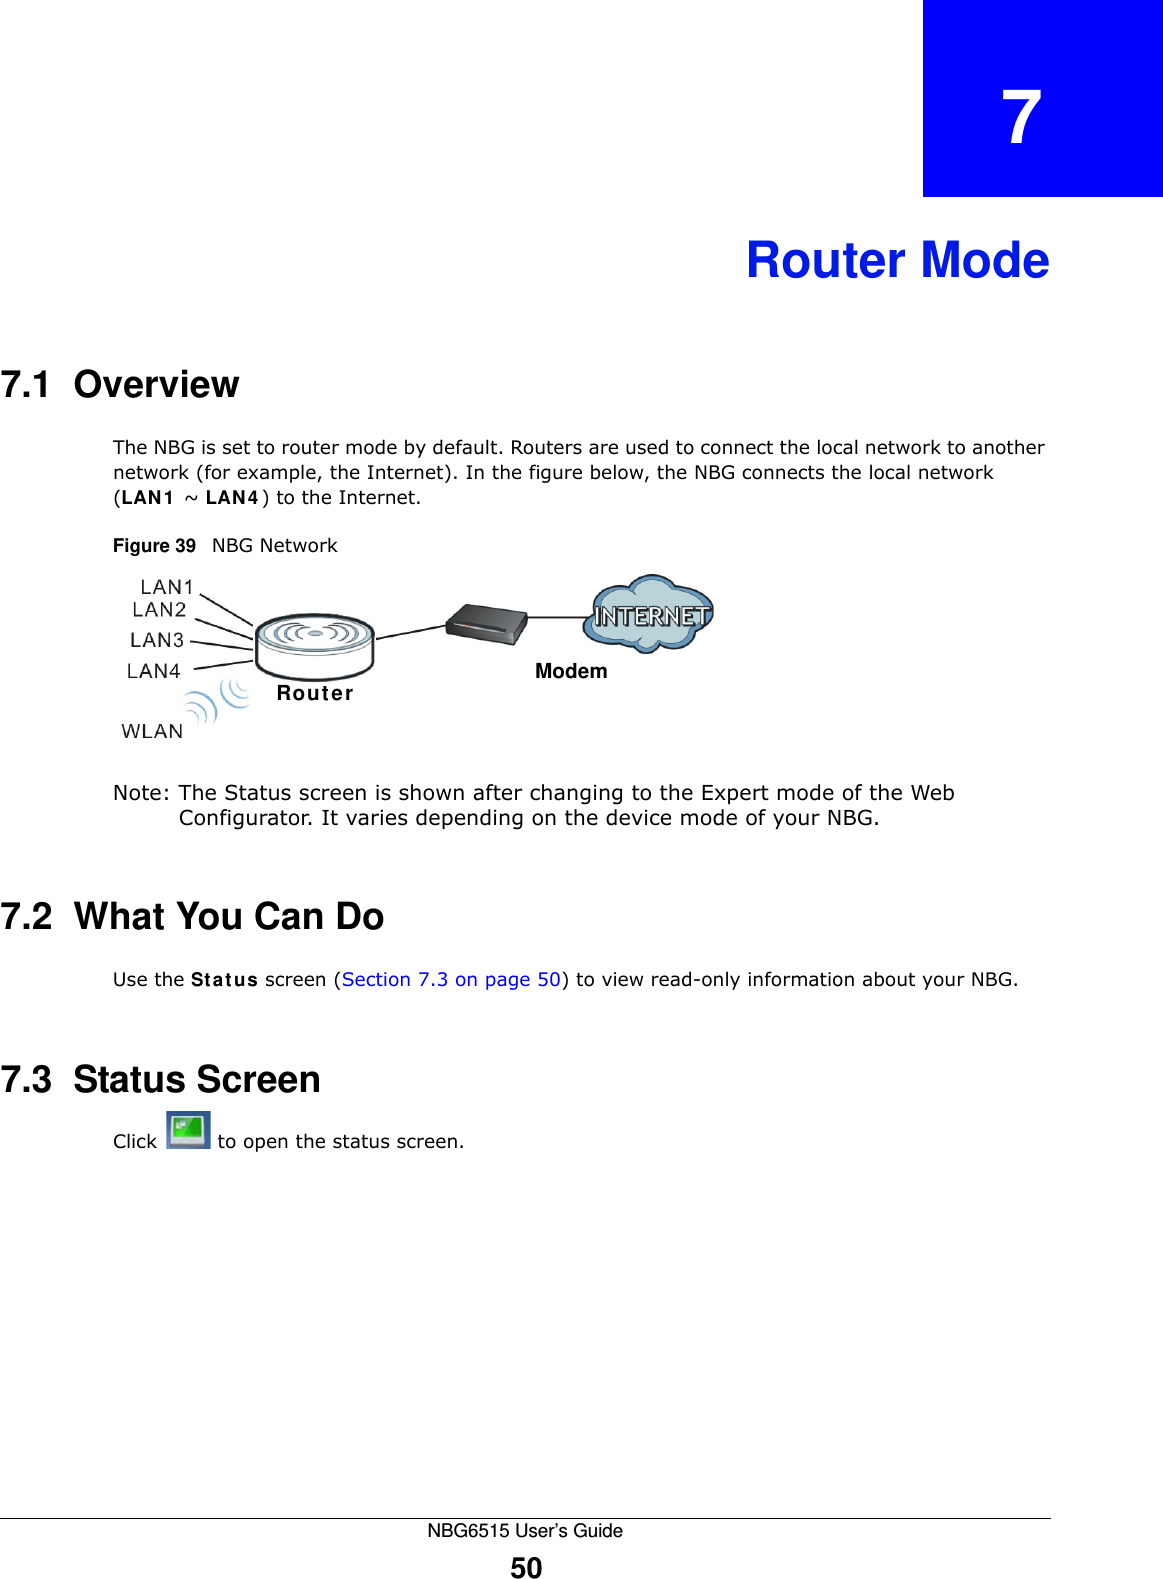 NBG6515 User’s Guide50CHAPTER   7Router Mode7.1  OverviewThe NBG is set to router mode by default. Routers are used to connect the local network to another network (for example, the Internet). In the figure below, the NBG connects the local network (LAN1 ~ LAN4) to the Internet.Figure 39   NBG NetworkNote: The Status screen is shown after changing to the Expert mode of the Web Configurator. It varies depending on the device mode of your NBG.7.2  What You Can DoUse the Status screen (Section 7.3 on page 50) to view read-only information about your NBG.7.3  Status ScreenClick  to open the status screen. ModemRouter